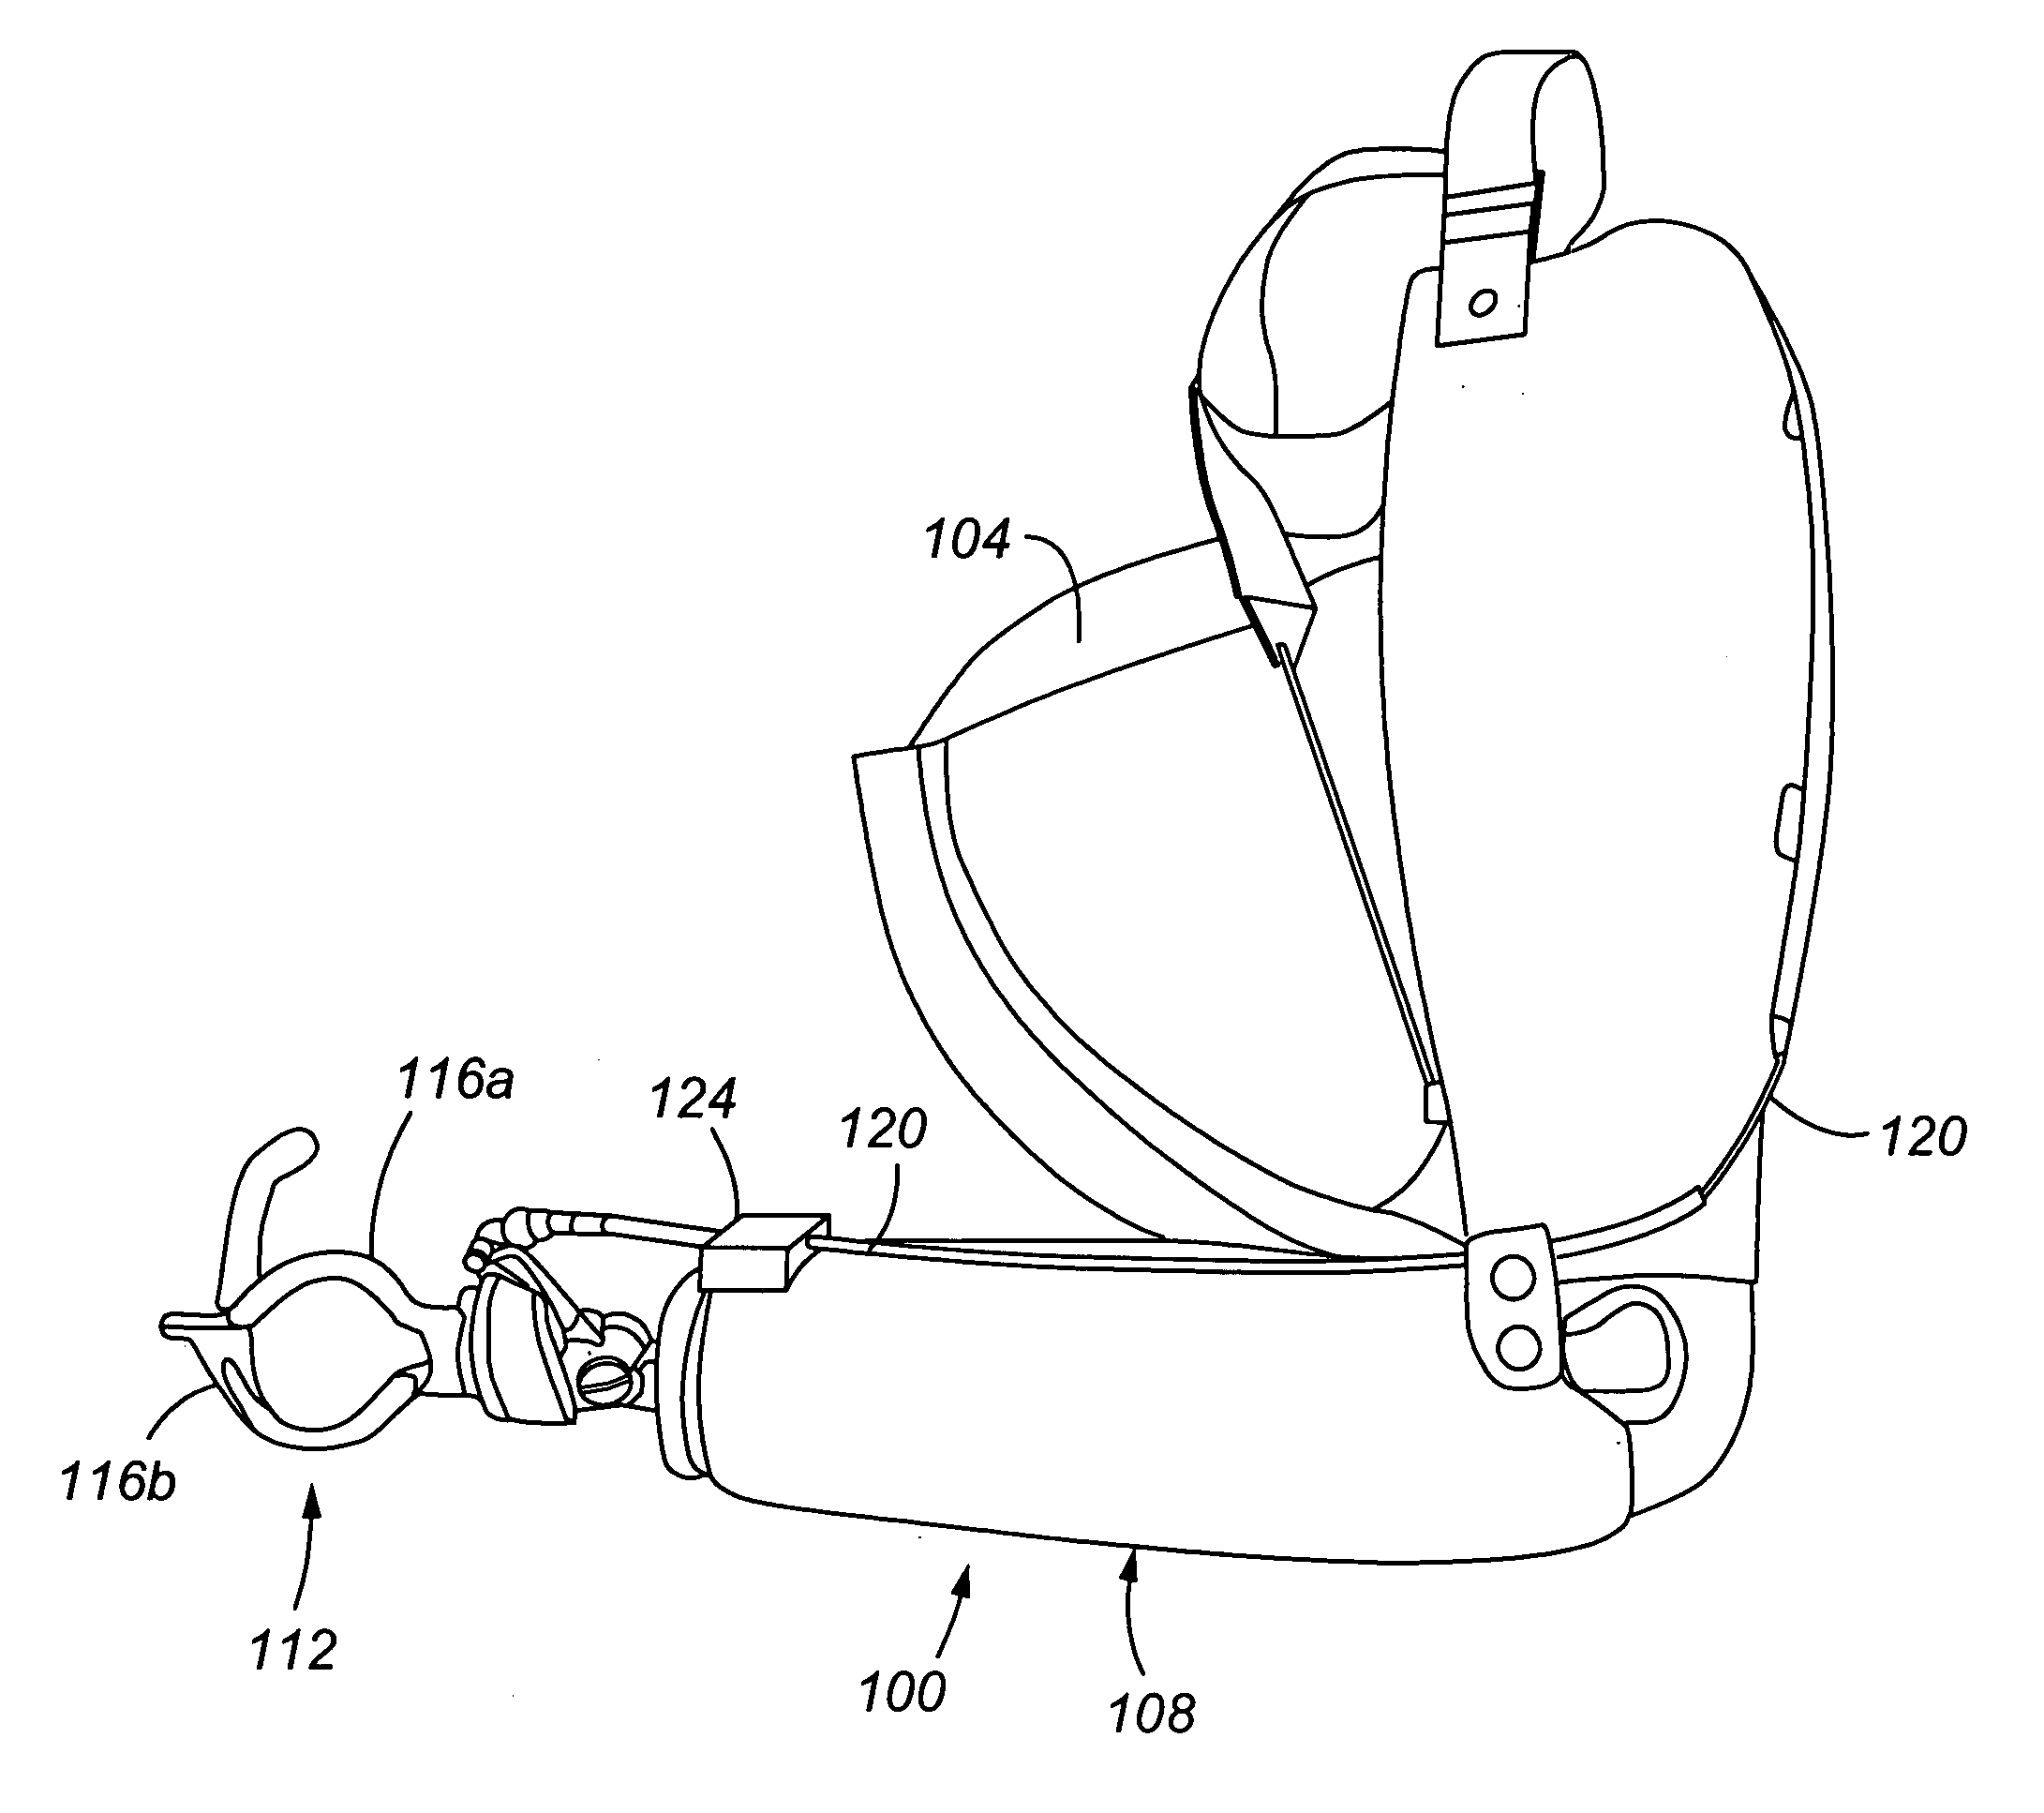 Cable lock device for prosthetic and orthotic devices